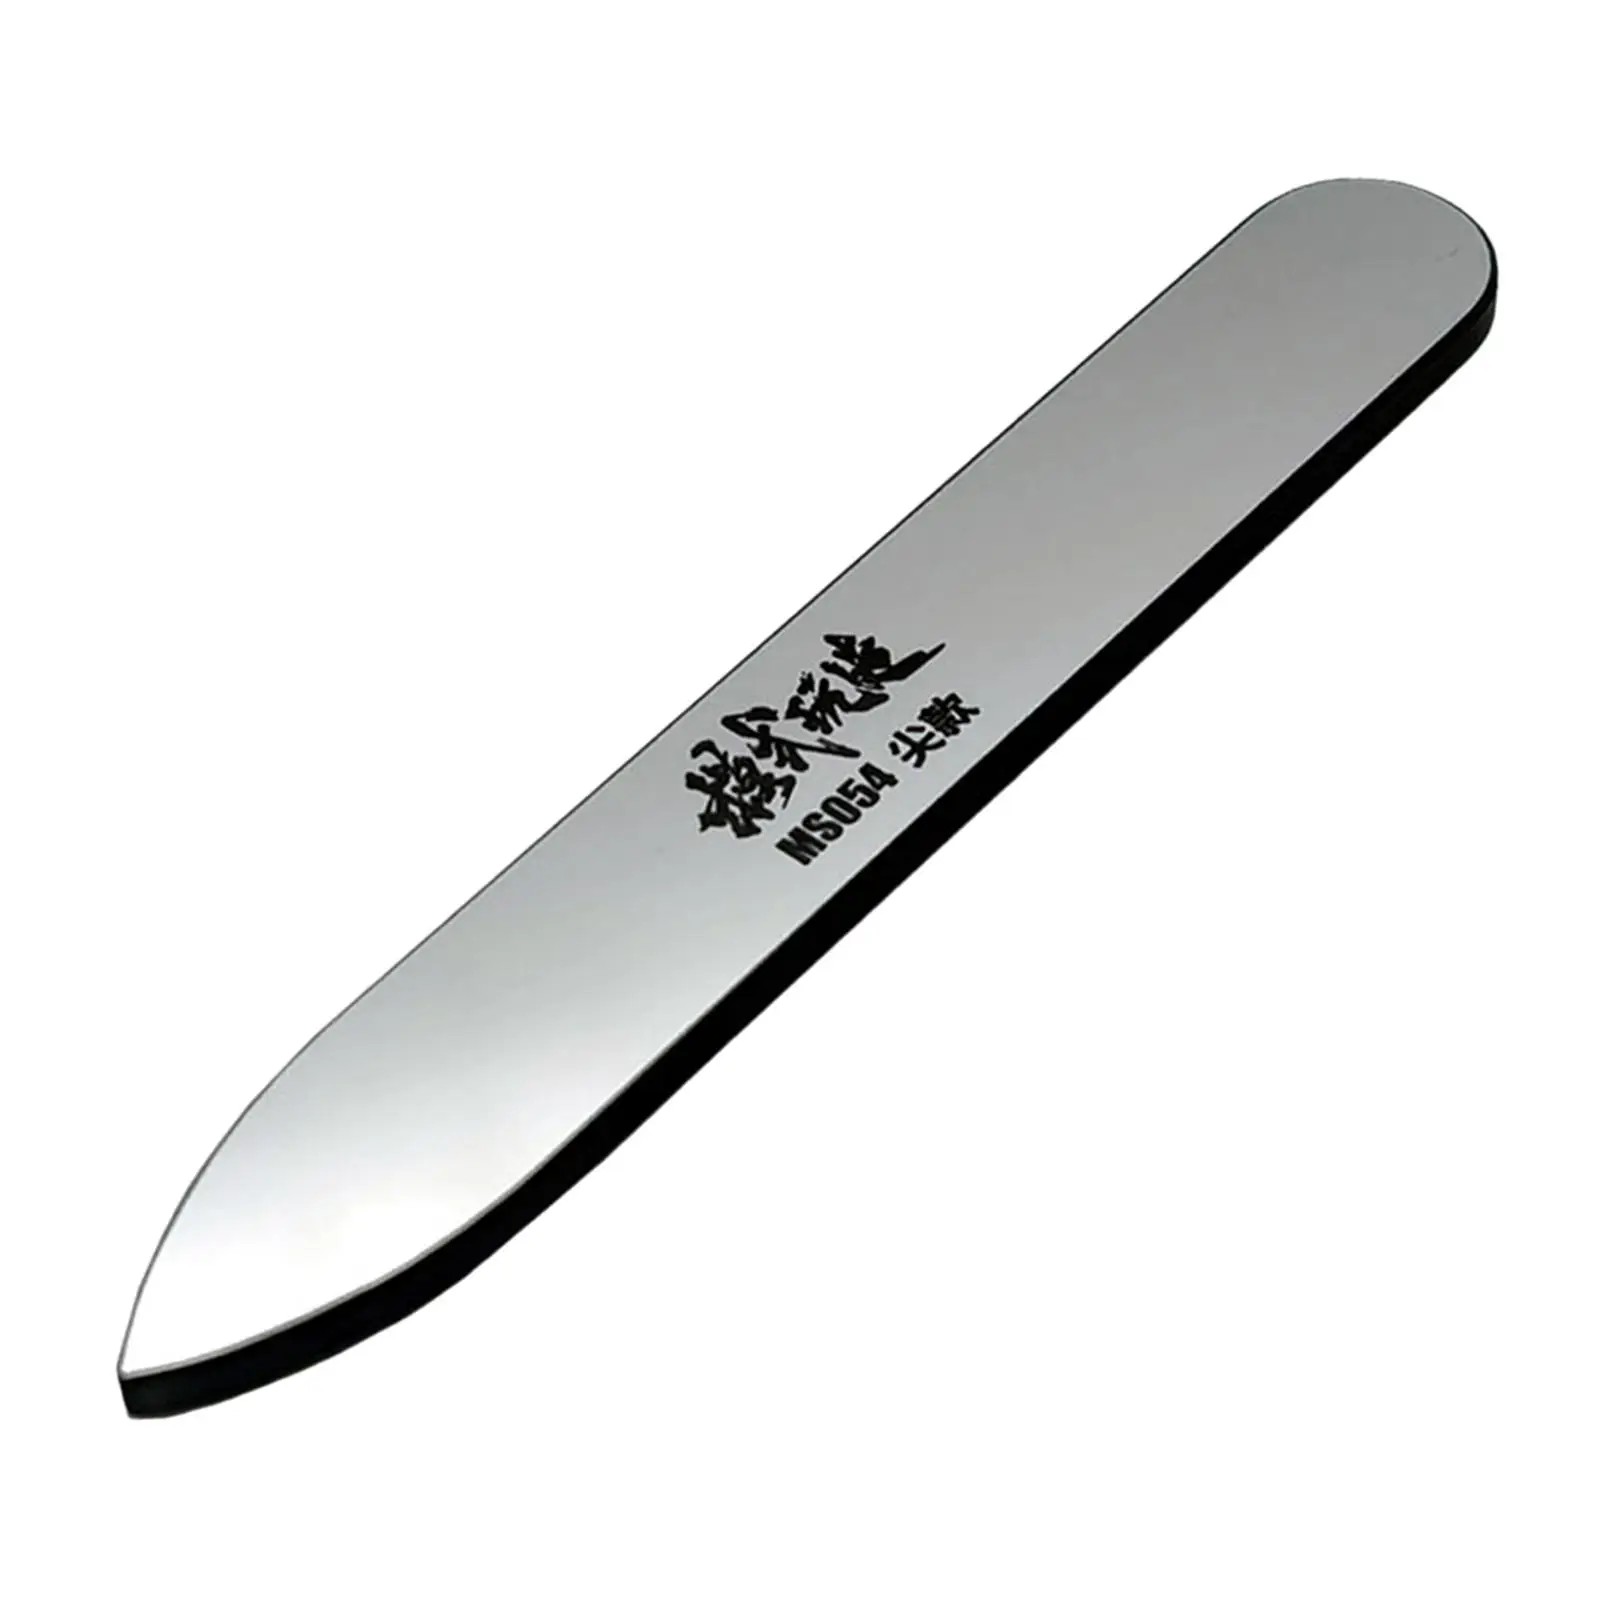 Precision Glass File for Gundam Model and for Car and Plane Kits Hobby Polishing